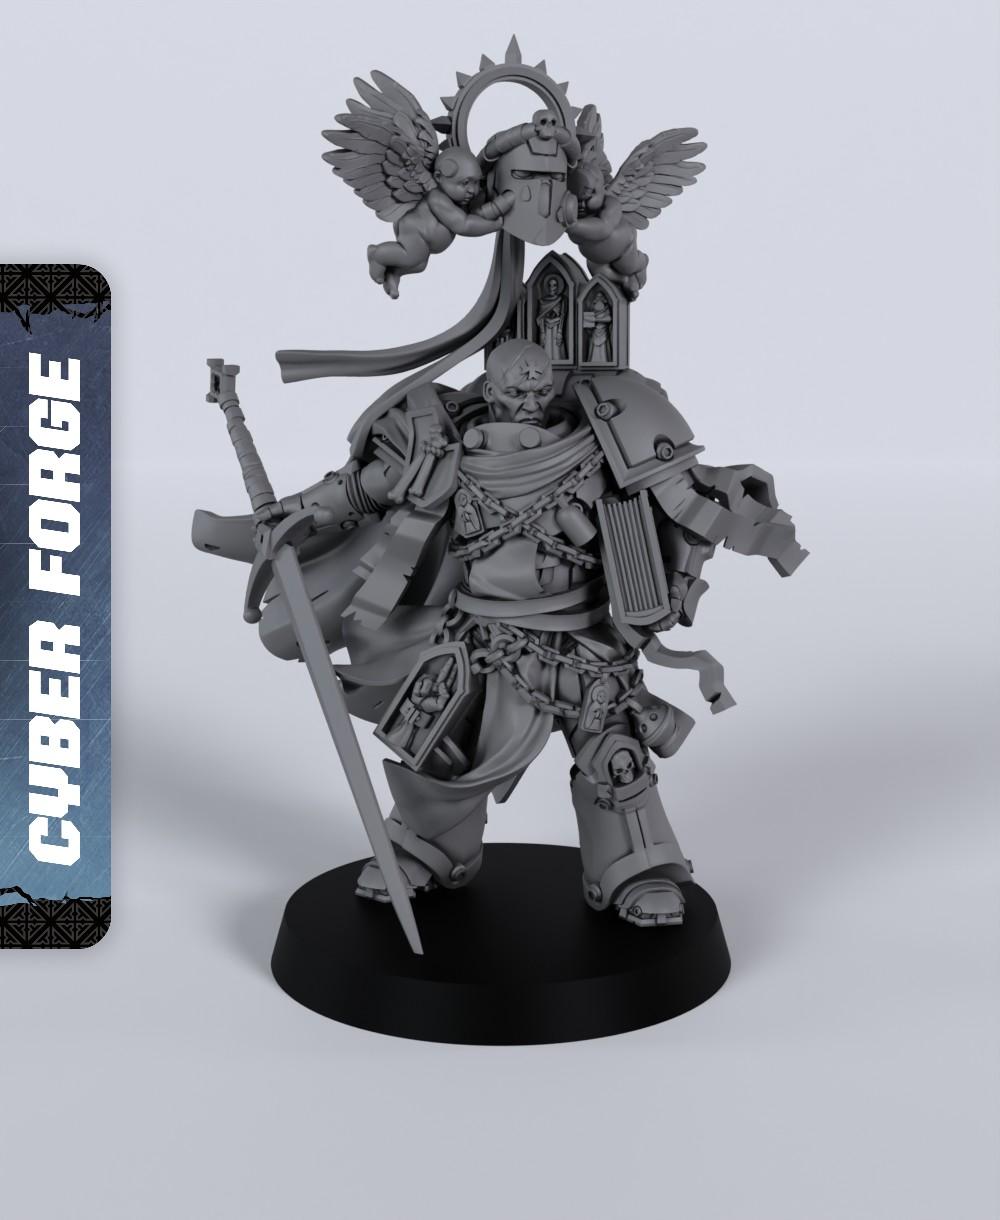 Black Knight Champion - With Free Cyberpunk Warhammer - 40k Sci-Fi Gift Ideas for RPG and Wargamers 3d model